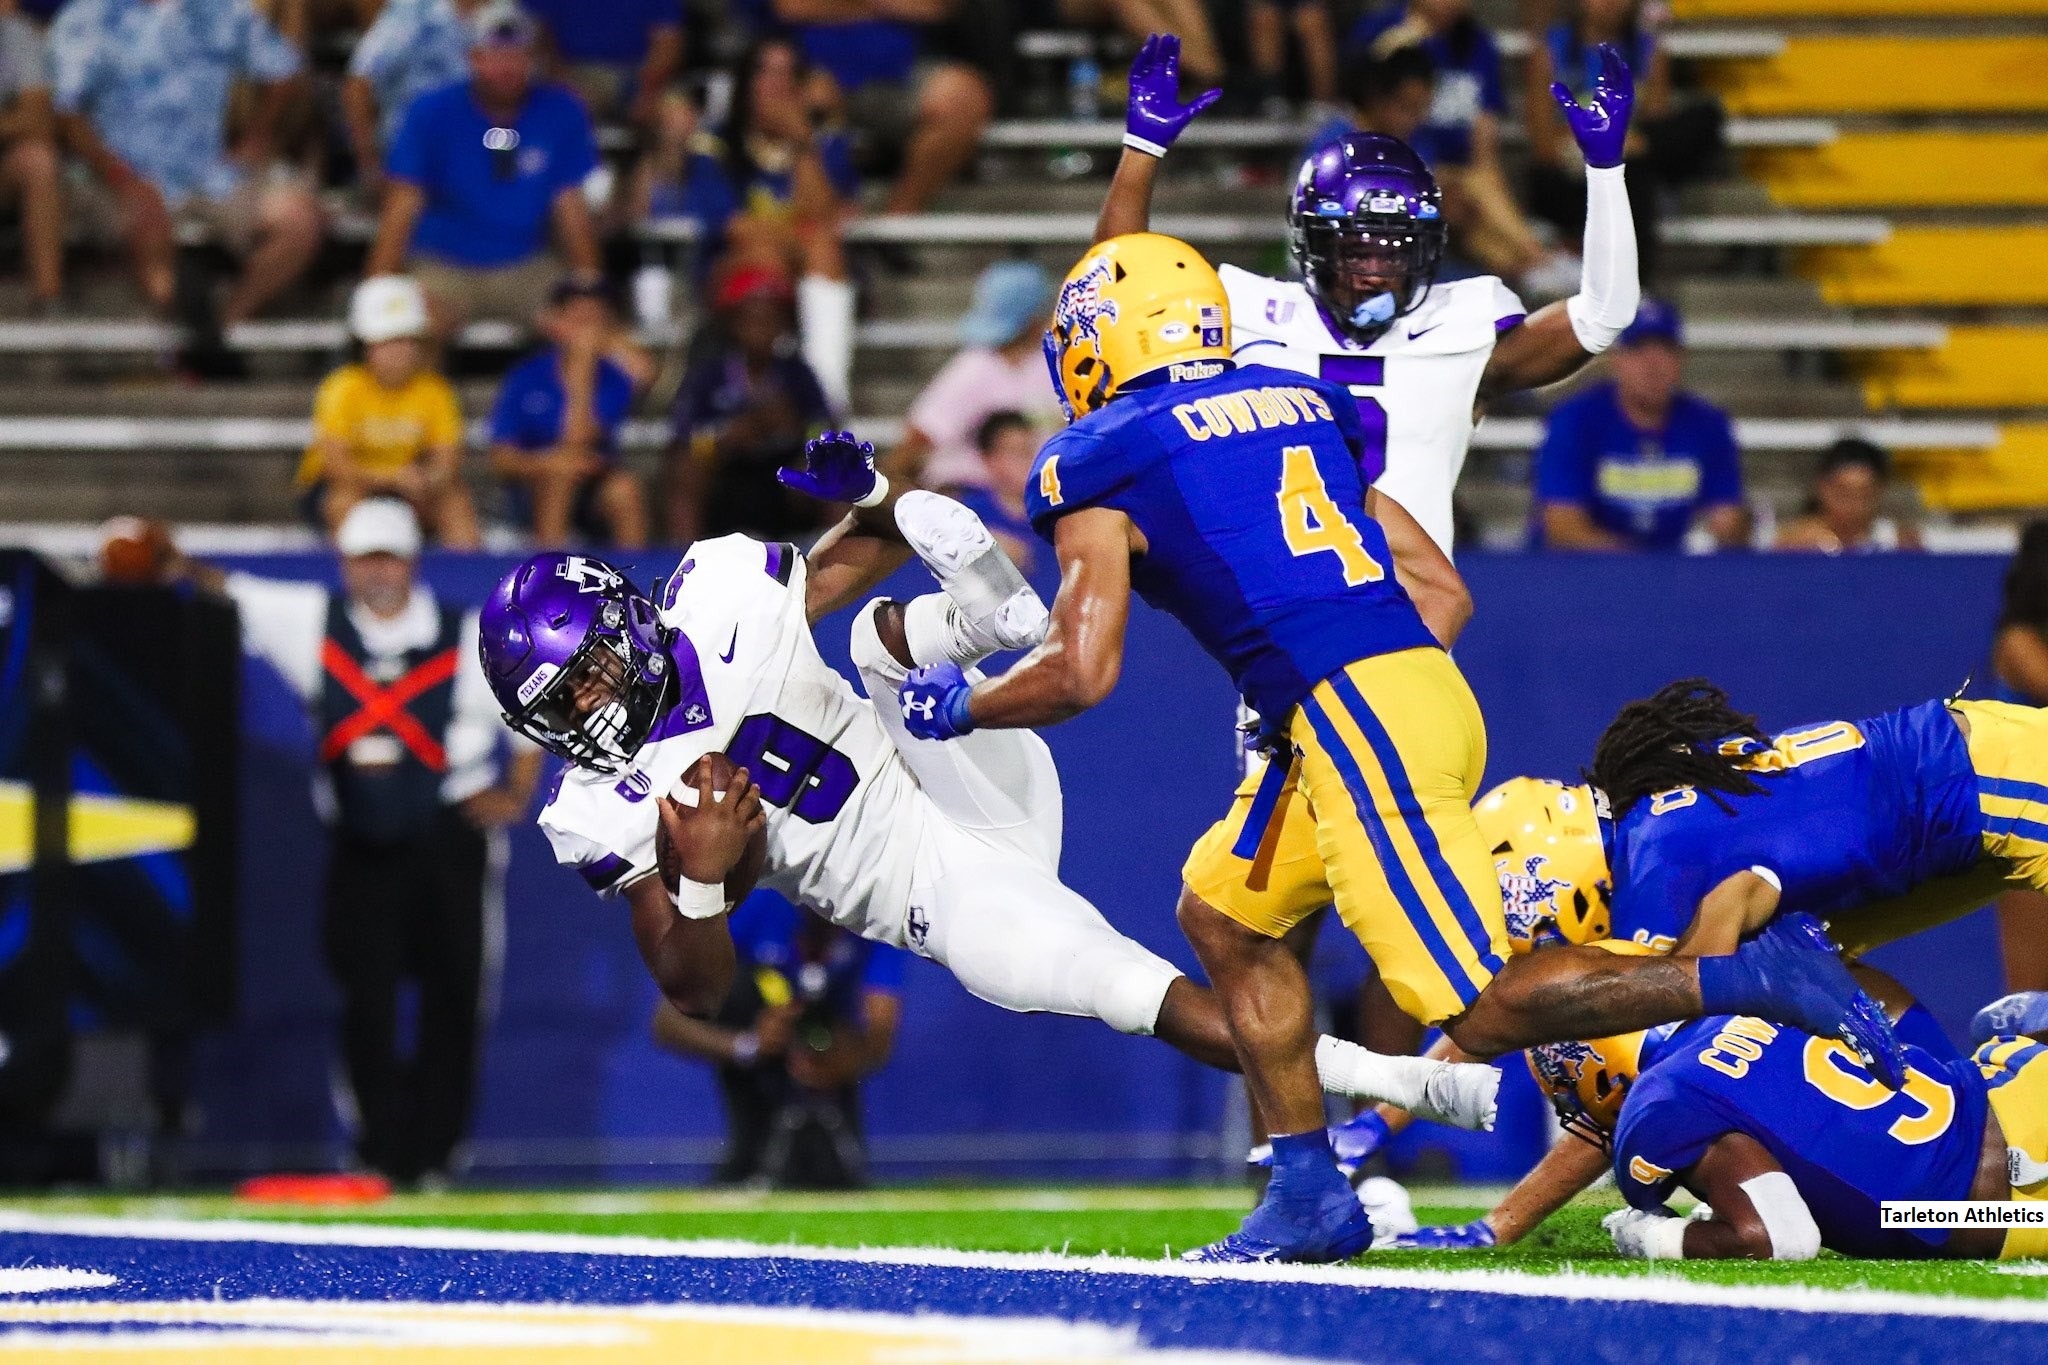 By the Numbers: Clock Rules Change Already Affecting FCS Offensive Totals